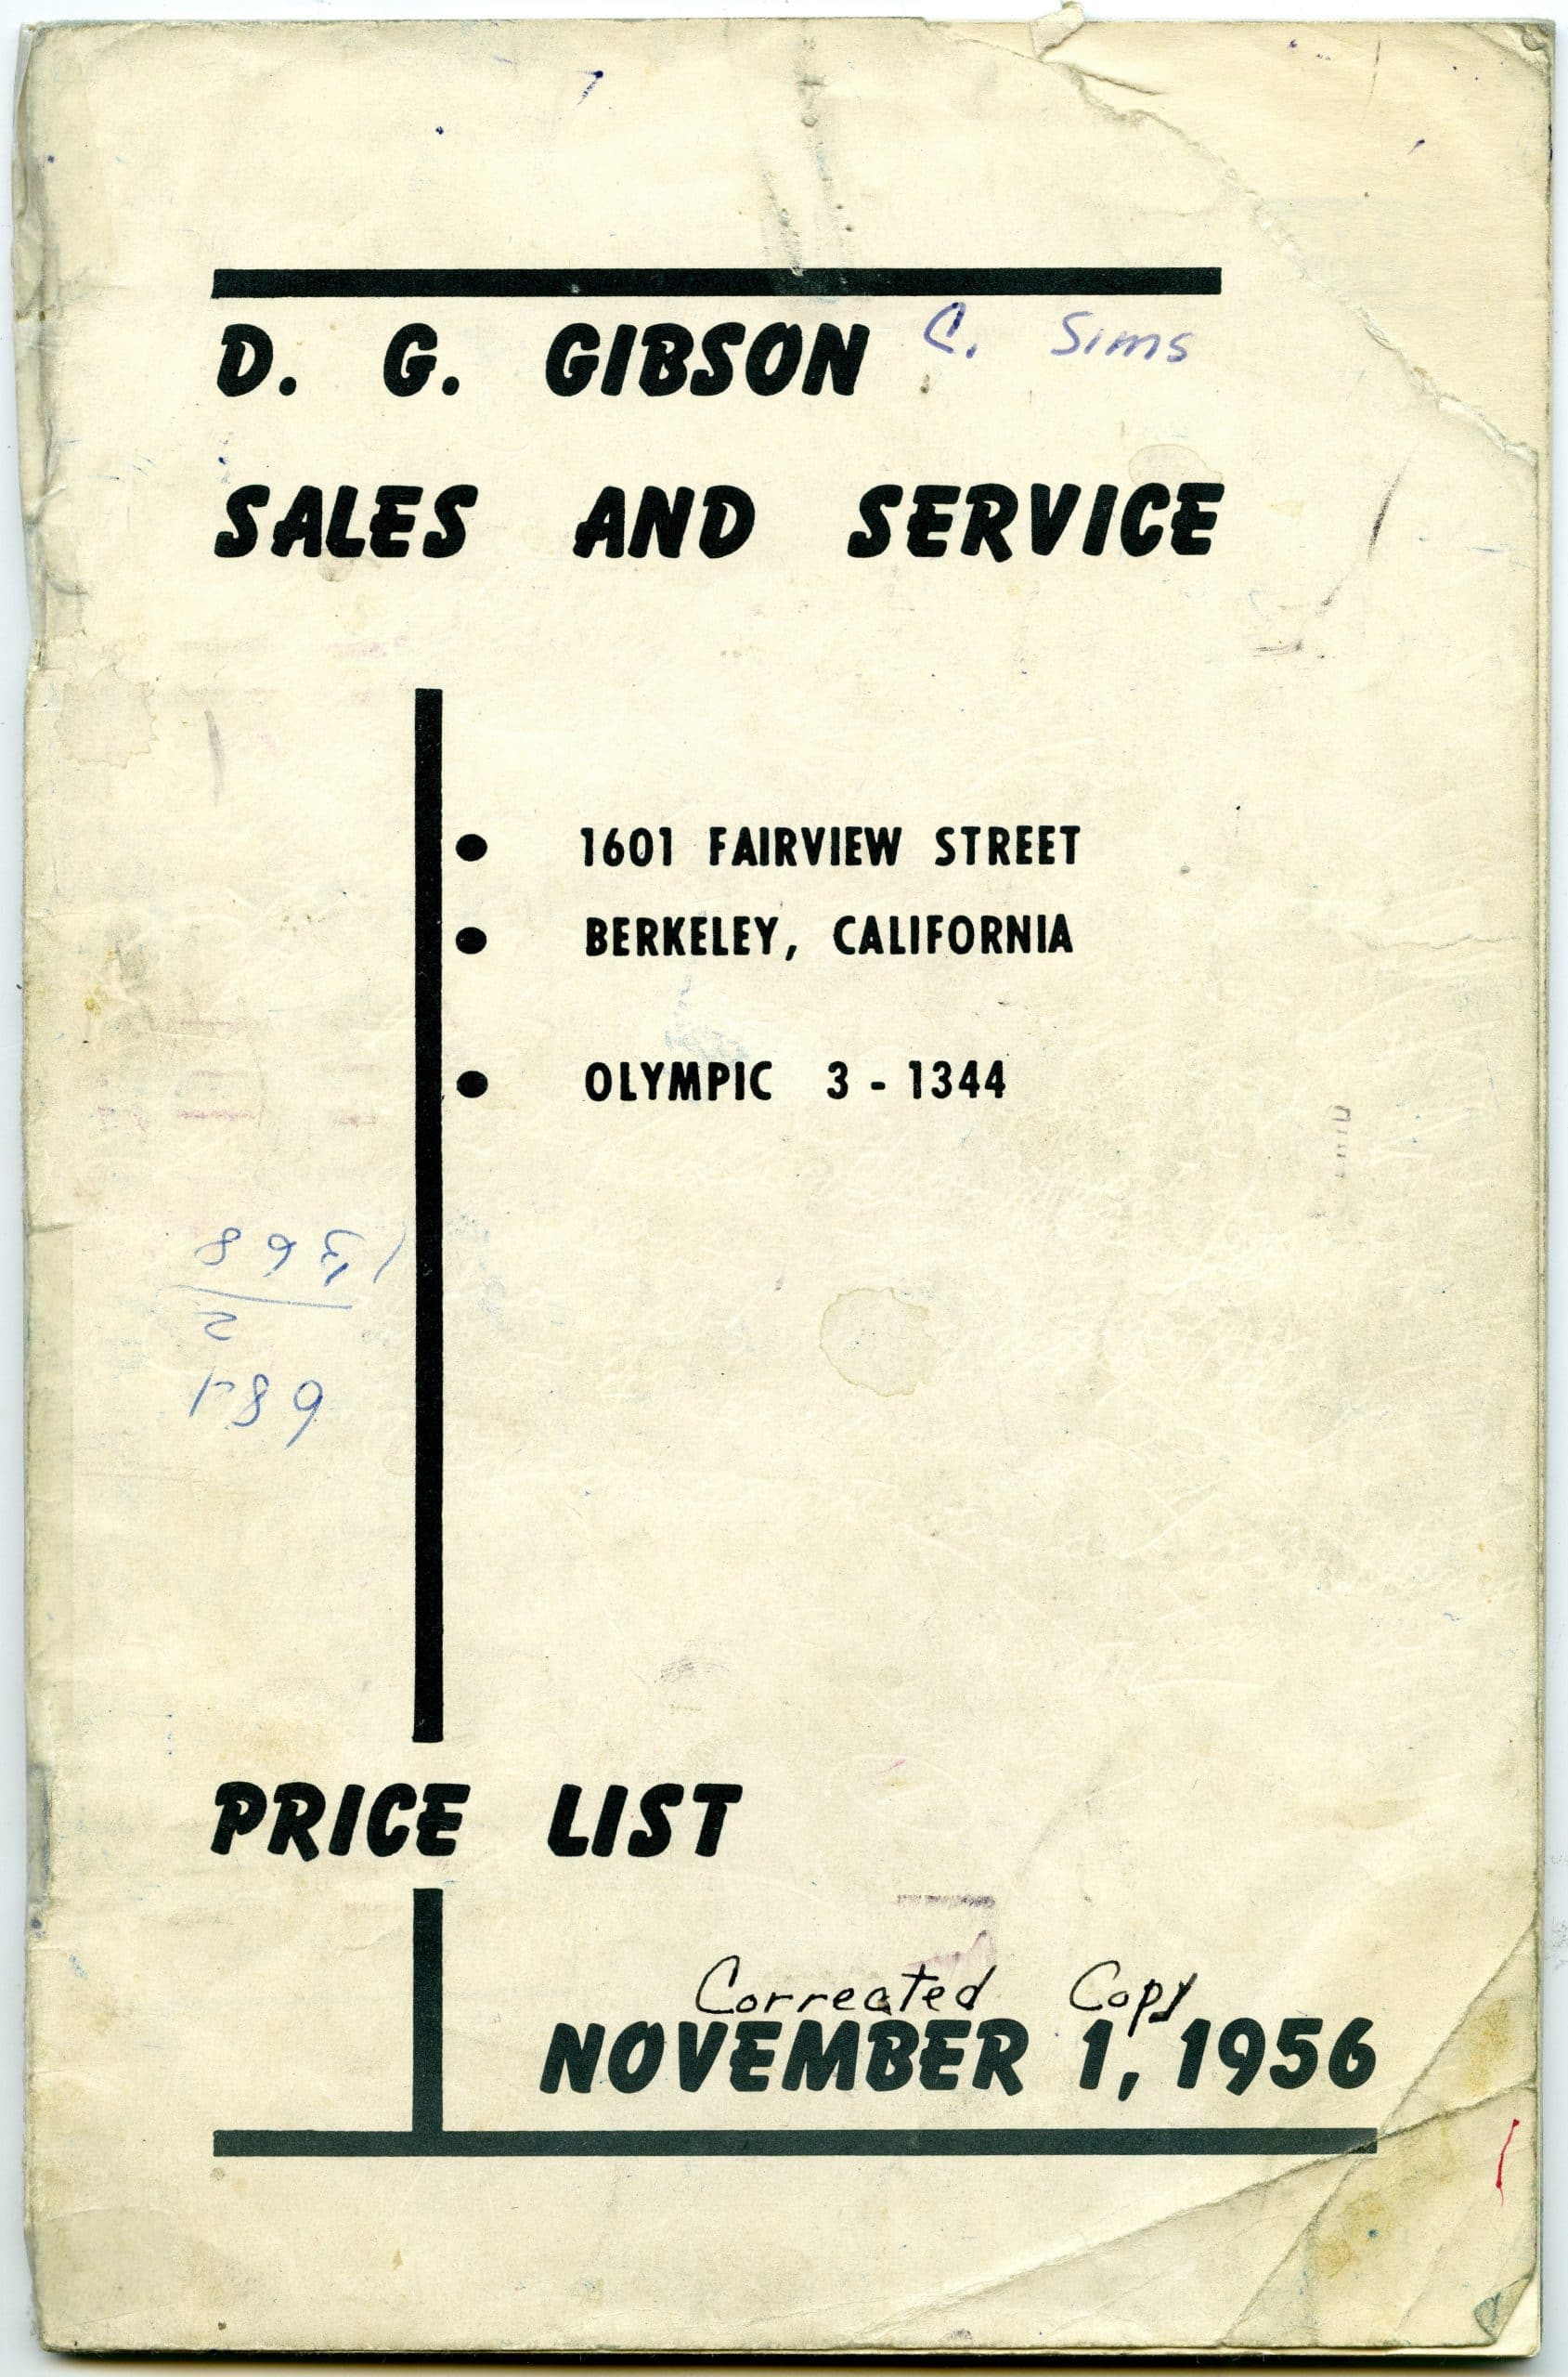 D. G. Gibson Sales and Service catalog